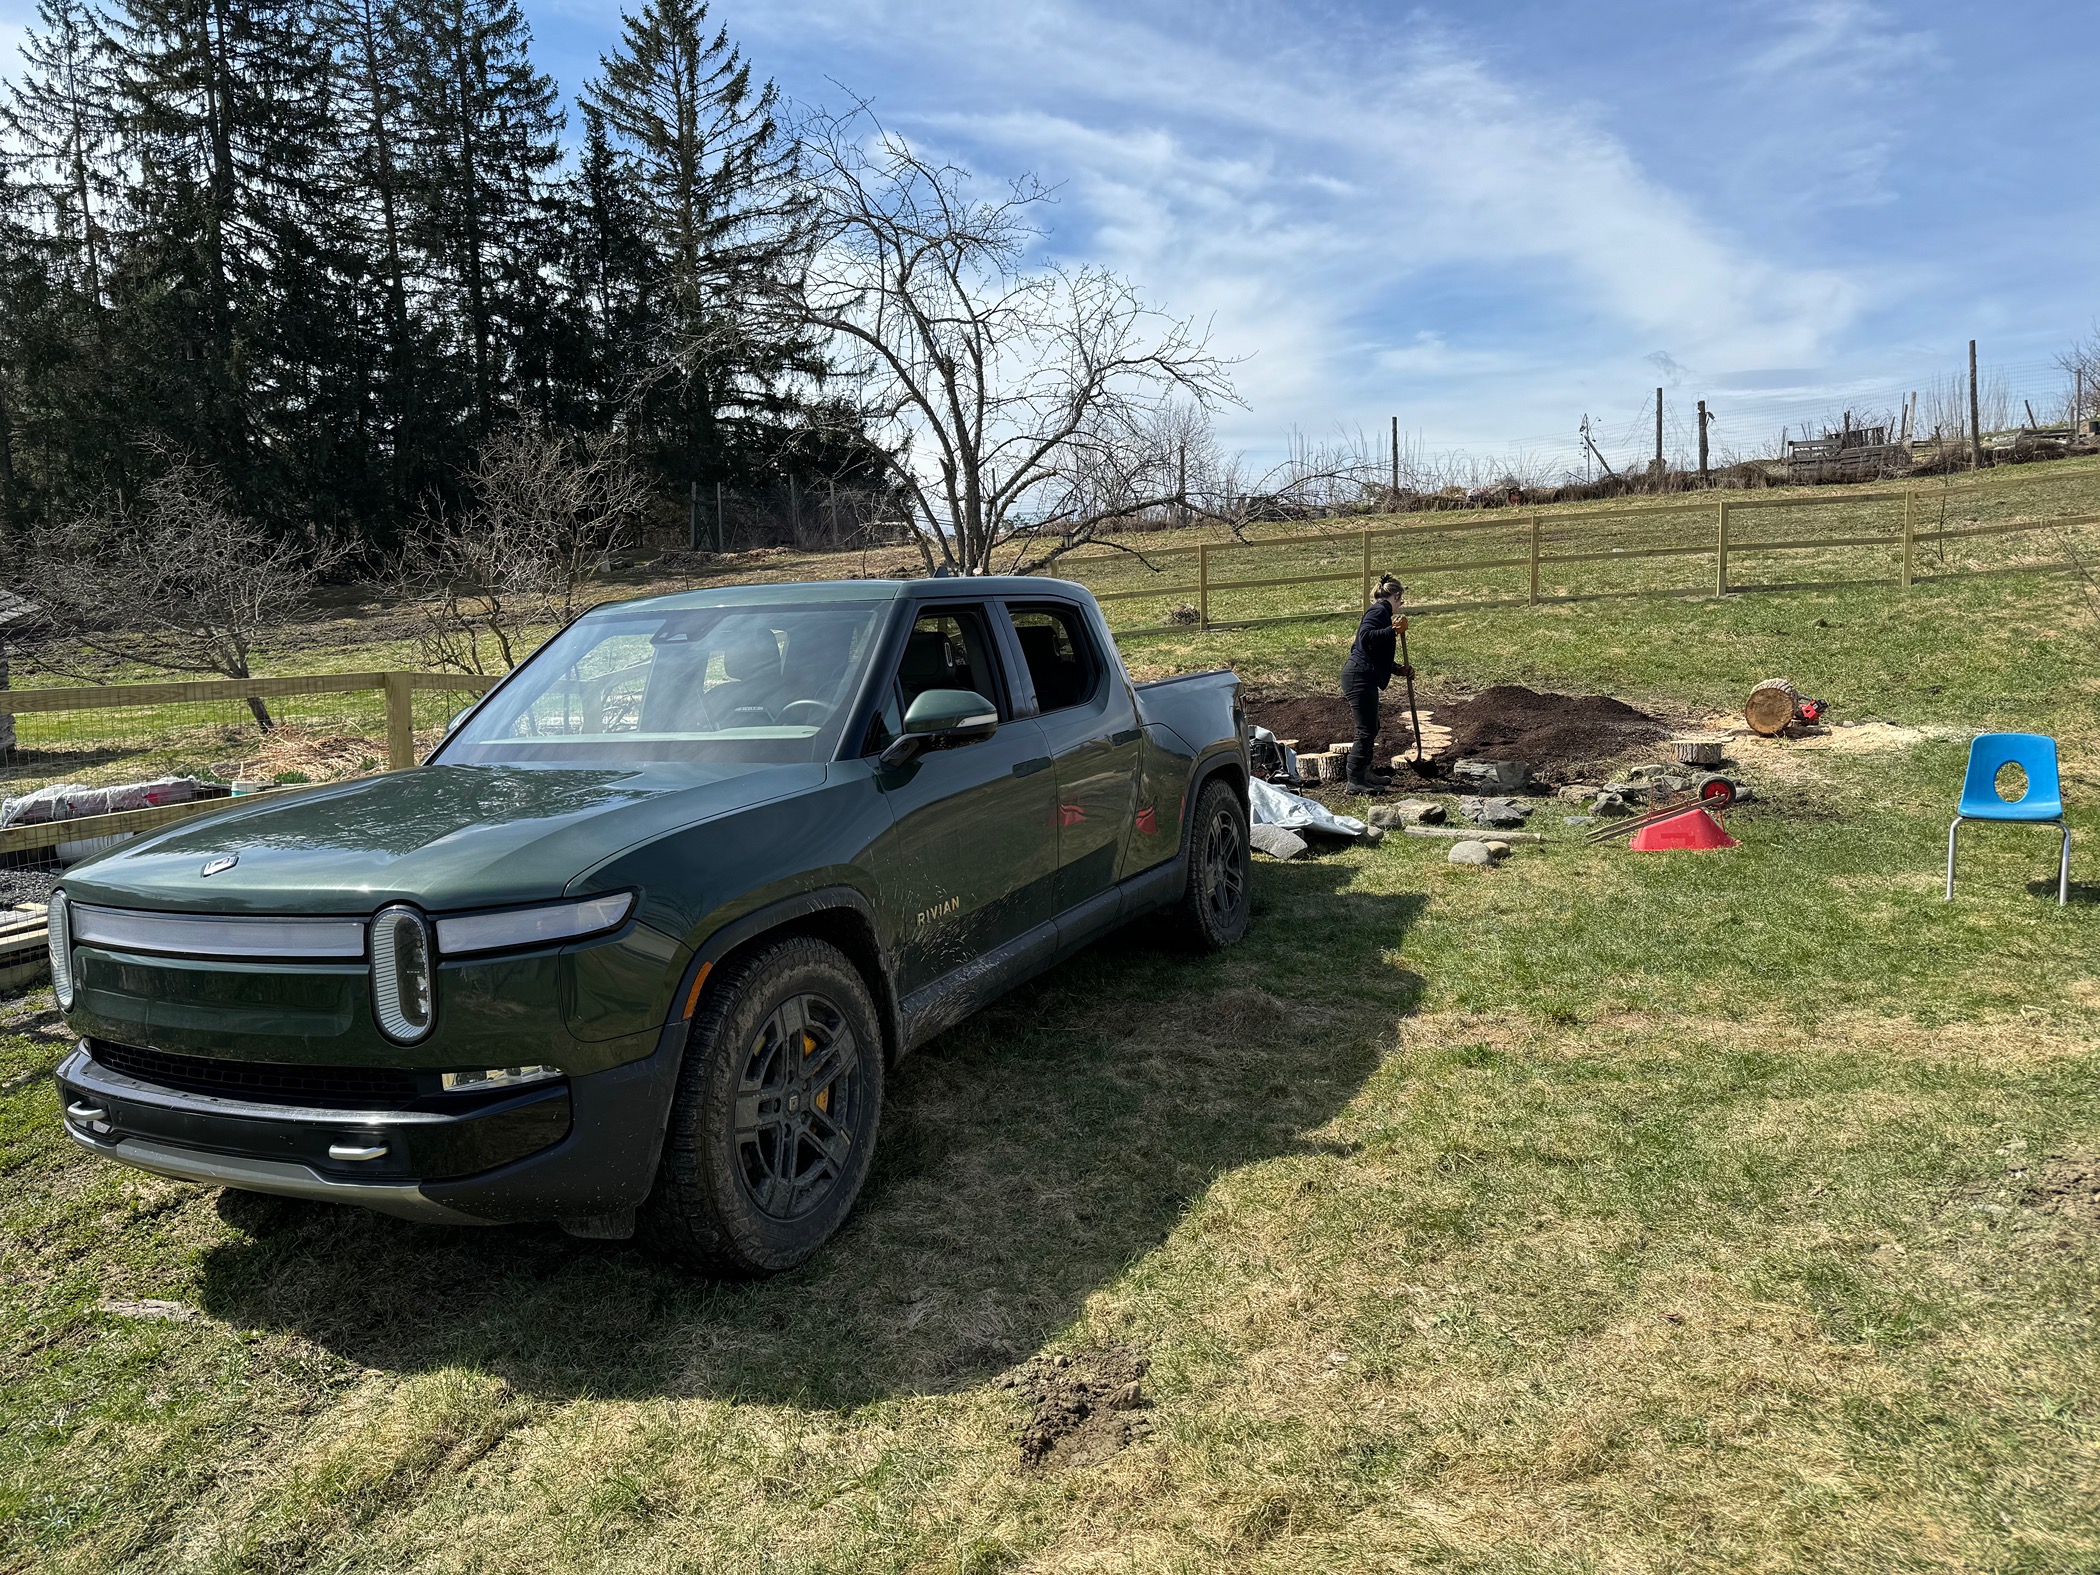 Rivian R1T R1S Random Rivian Photos of the Day - Post Yours! 📸 🤳 IMG_0828